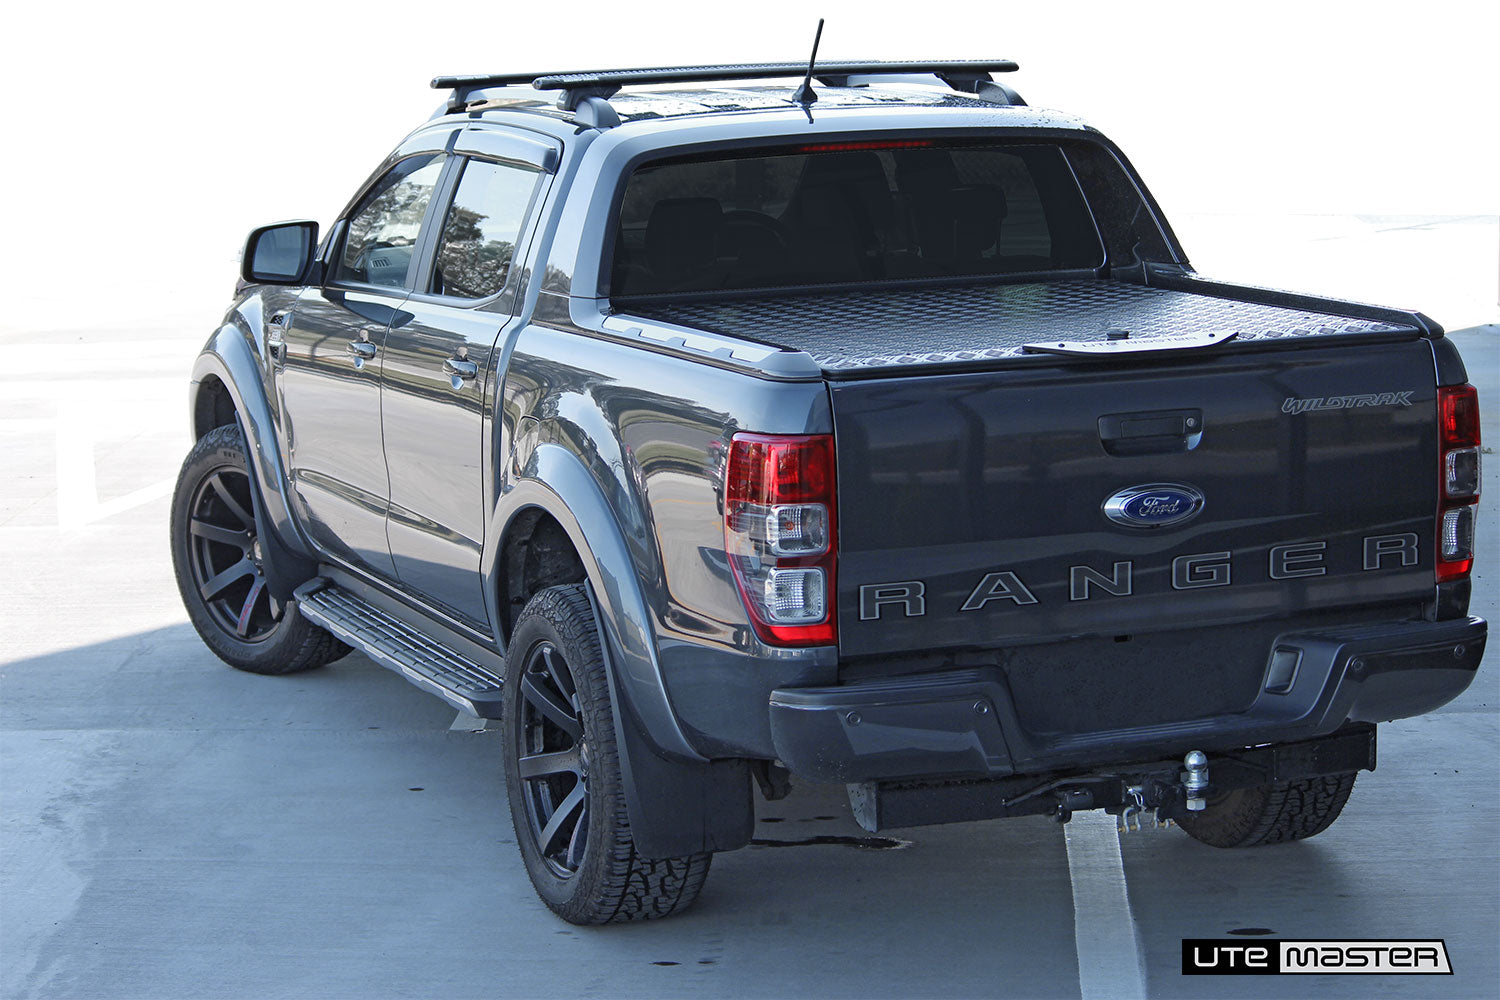 UTEMASTER LOAD-LID TO SUIT FORD RANGER (PX SERIES 2011-2022